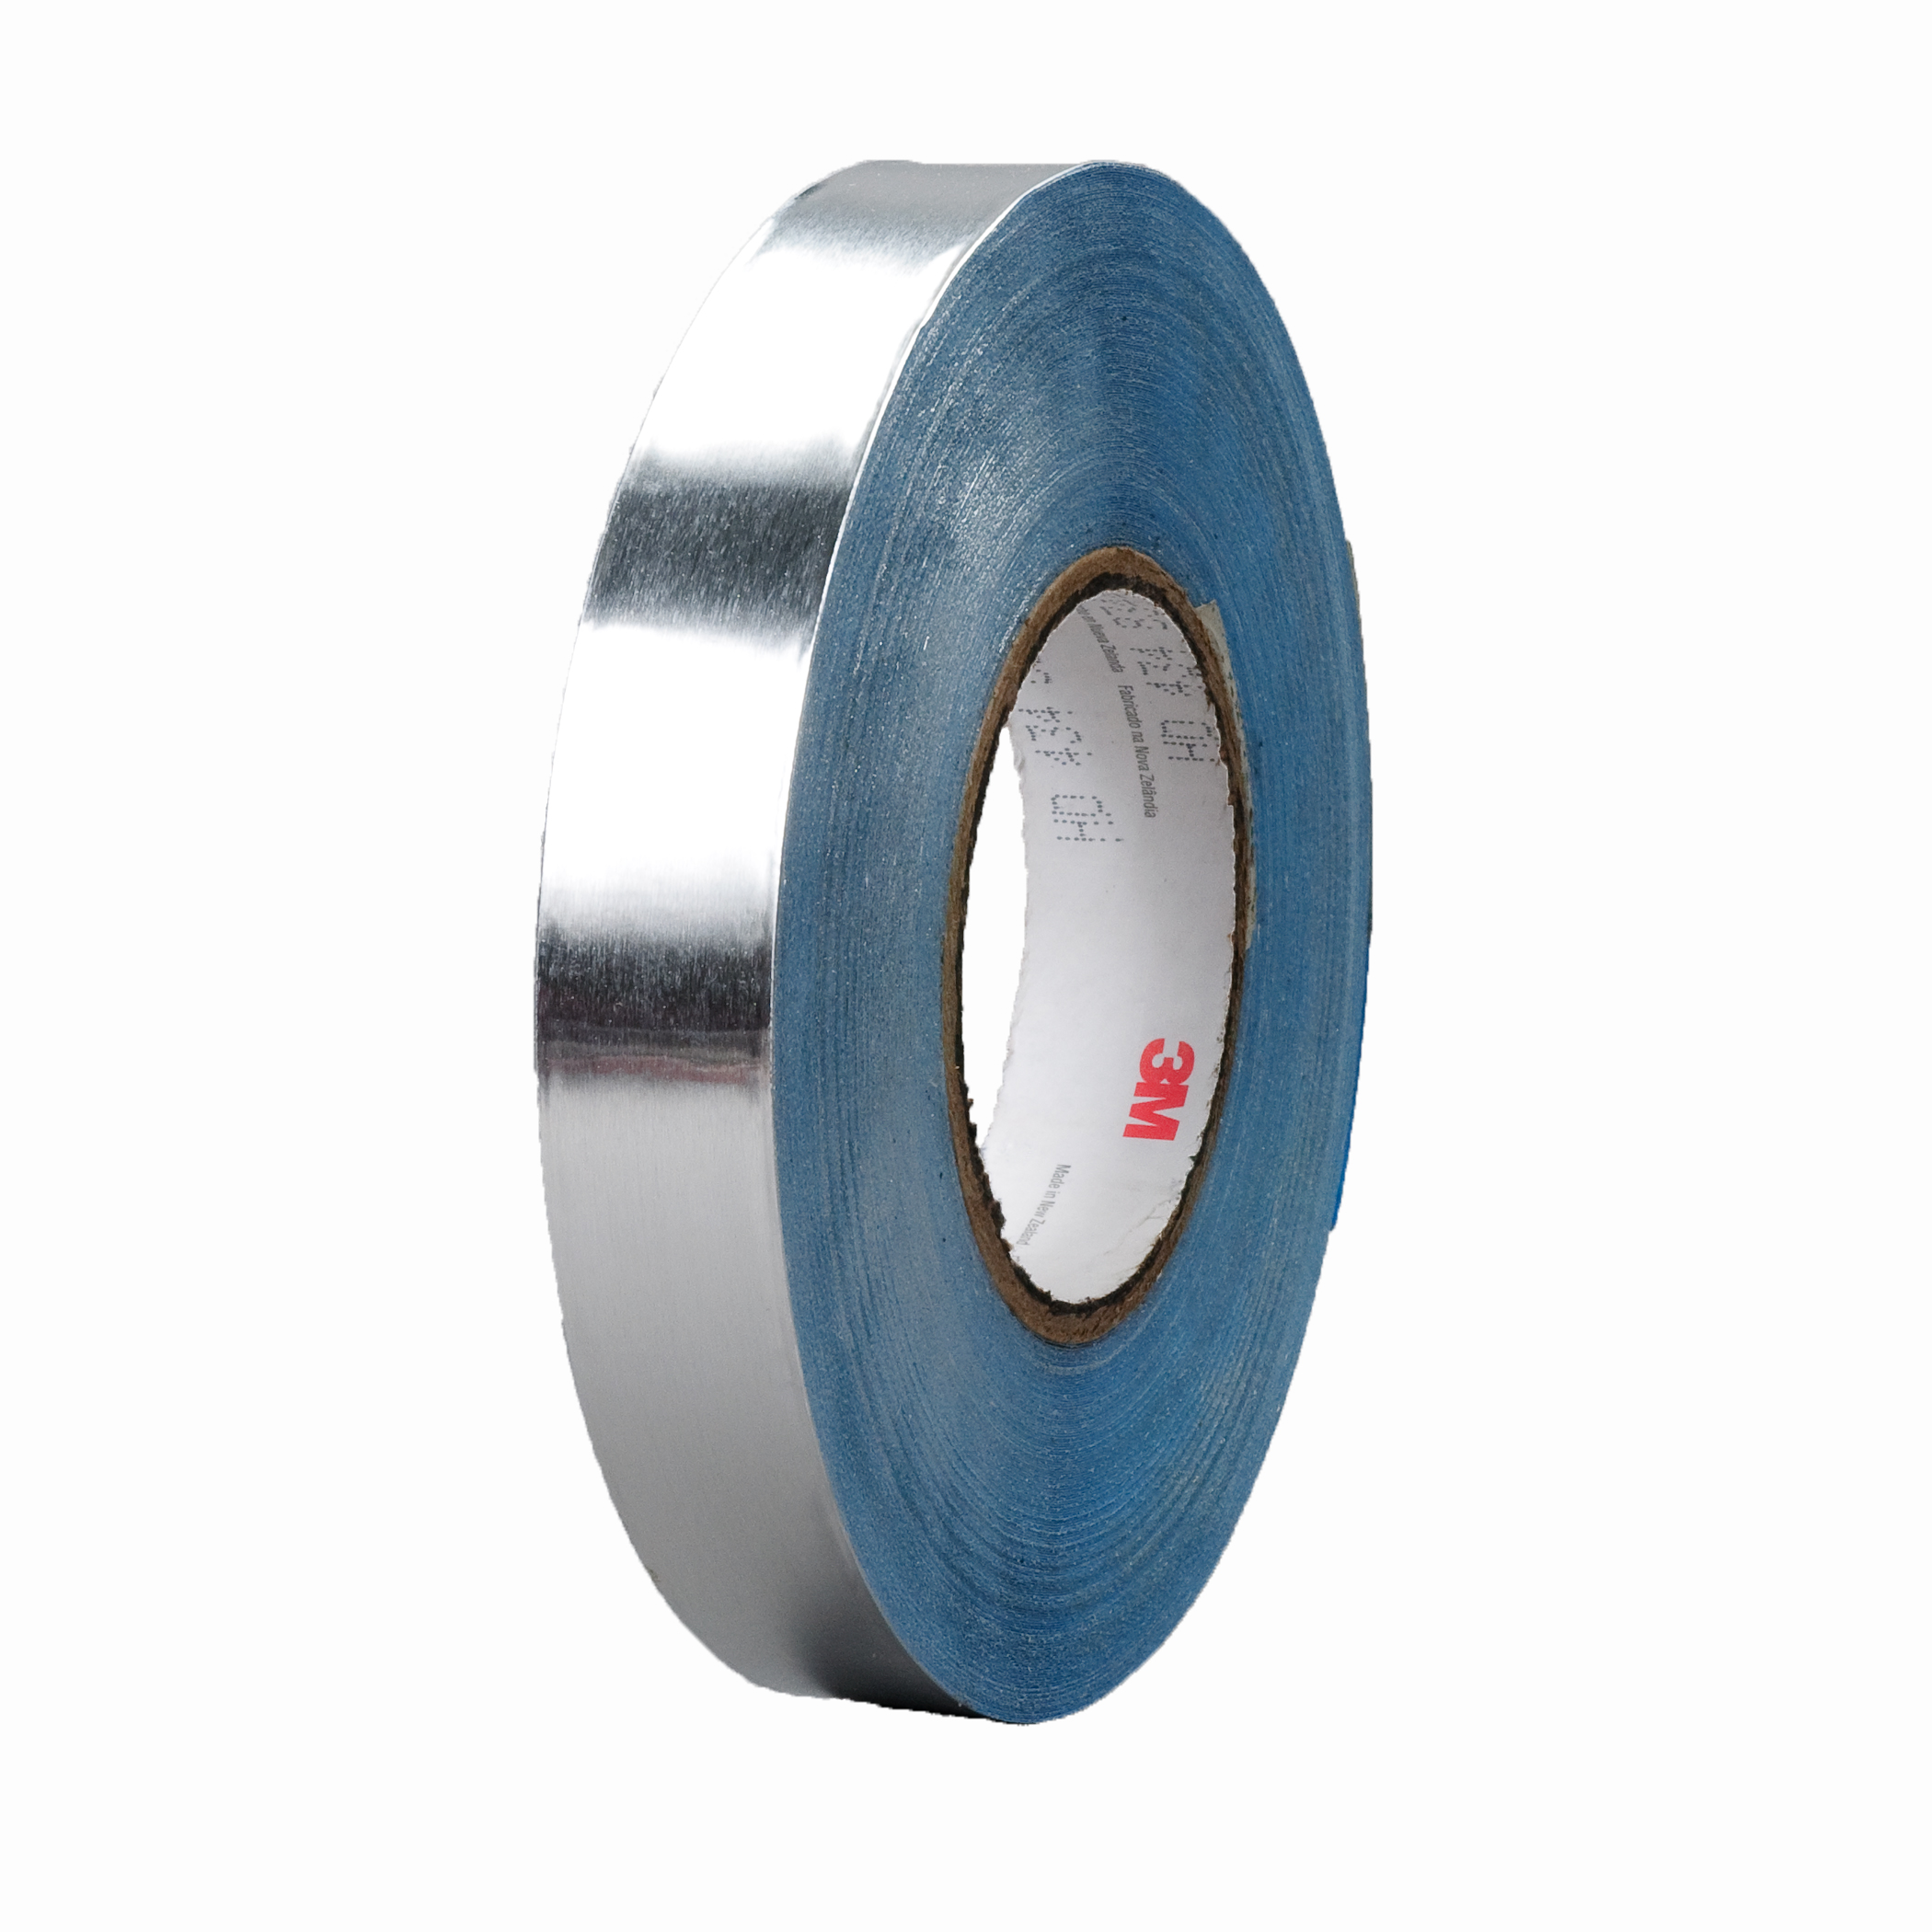 00051138956516 3M™ Vibration Damping Tape 435, Silver, 10 in x 36 yd,  13.5 mil, roll per case Aircraft products aluminum-tapes 9361337